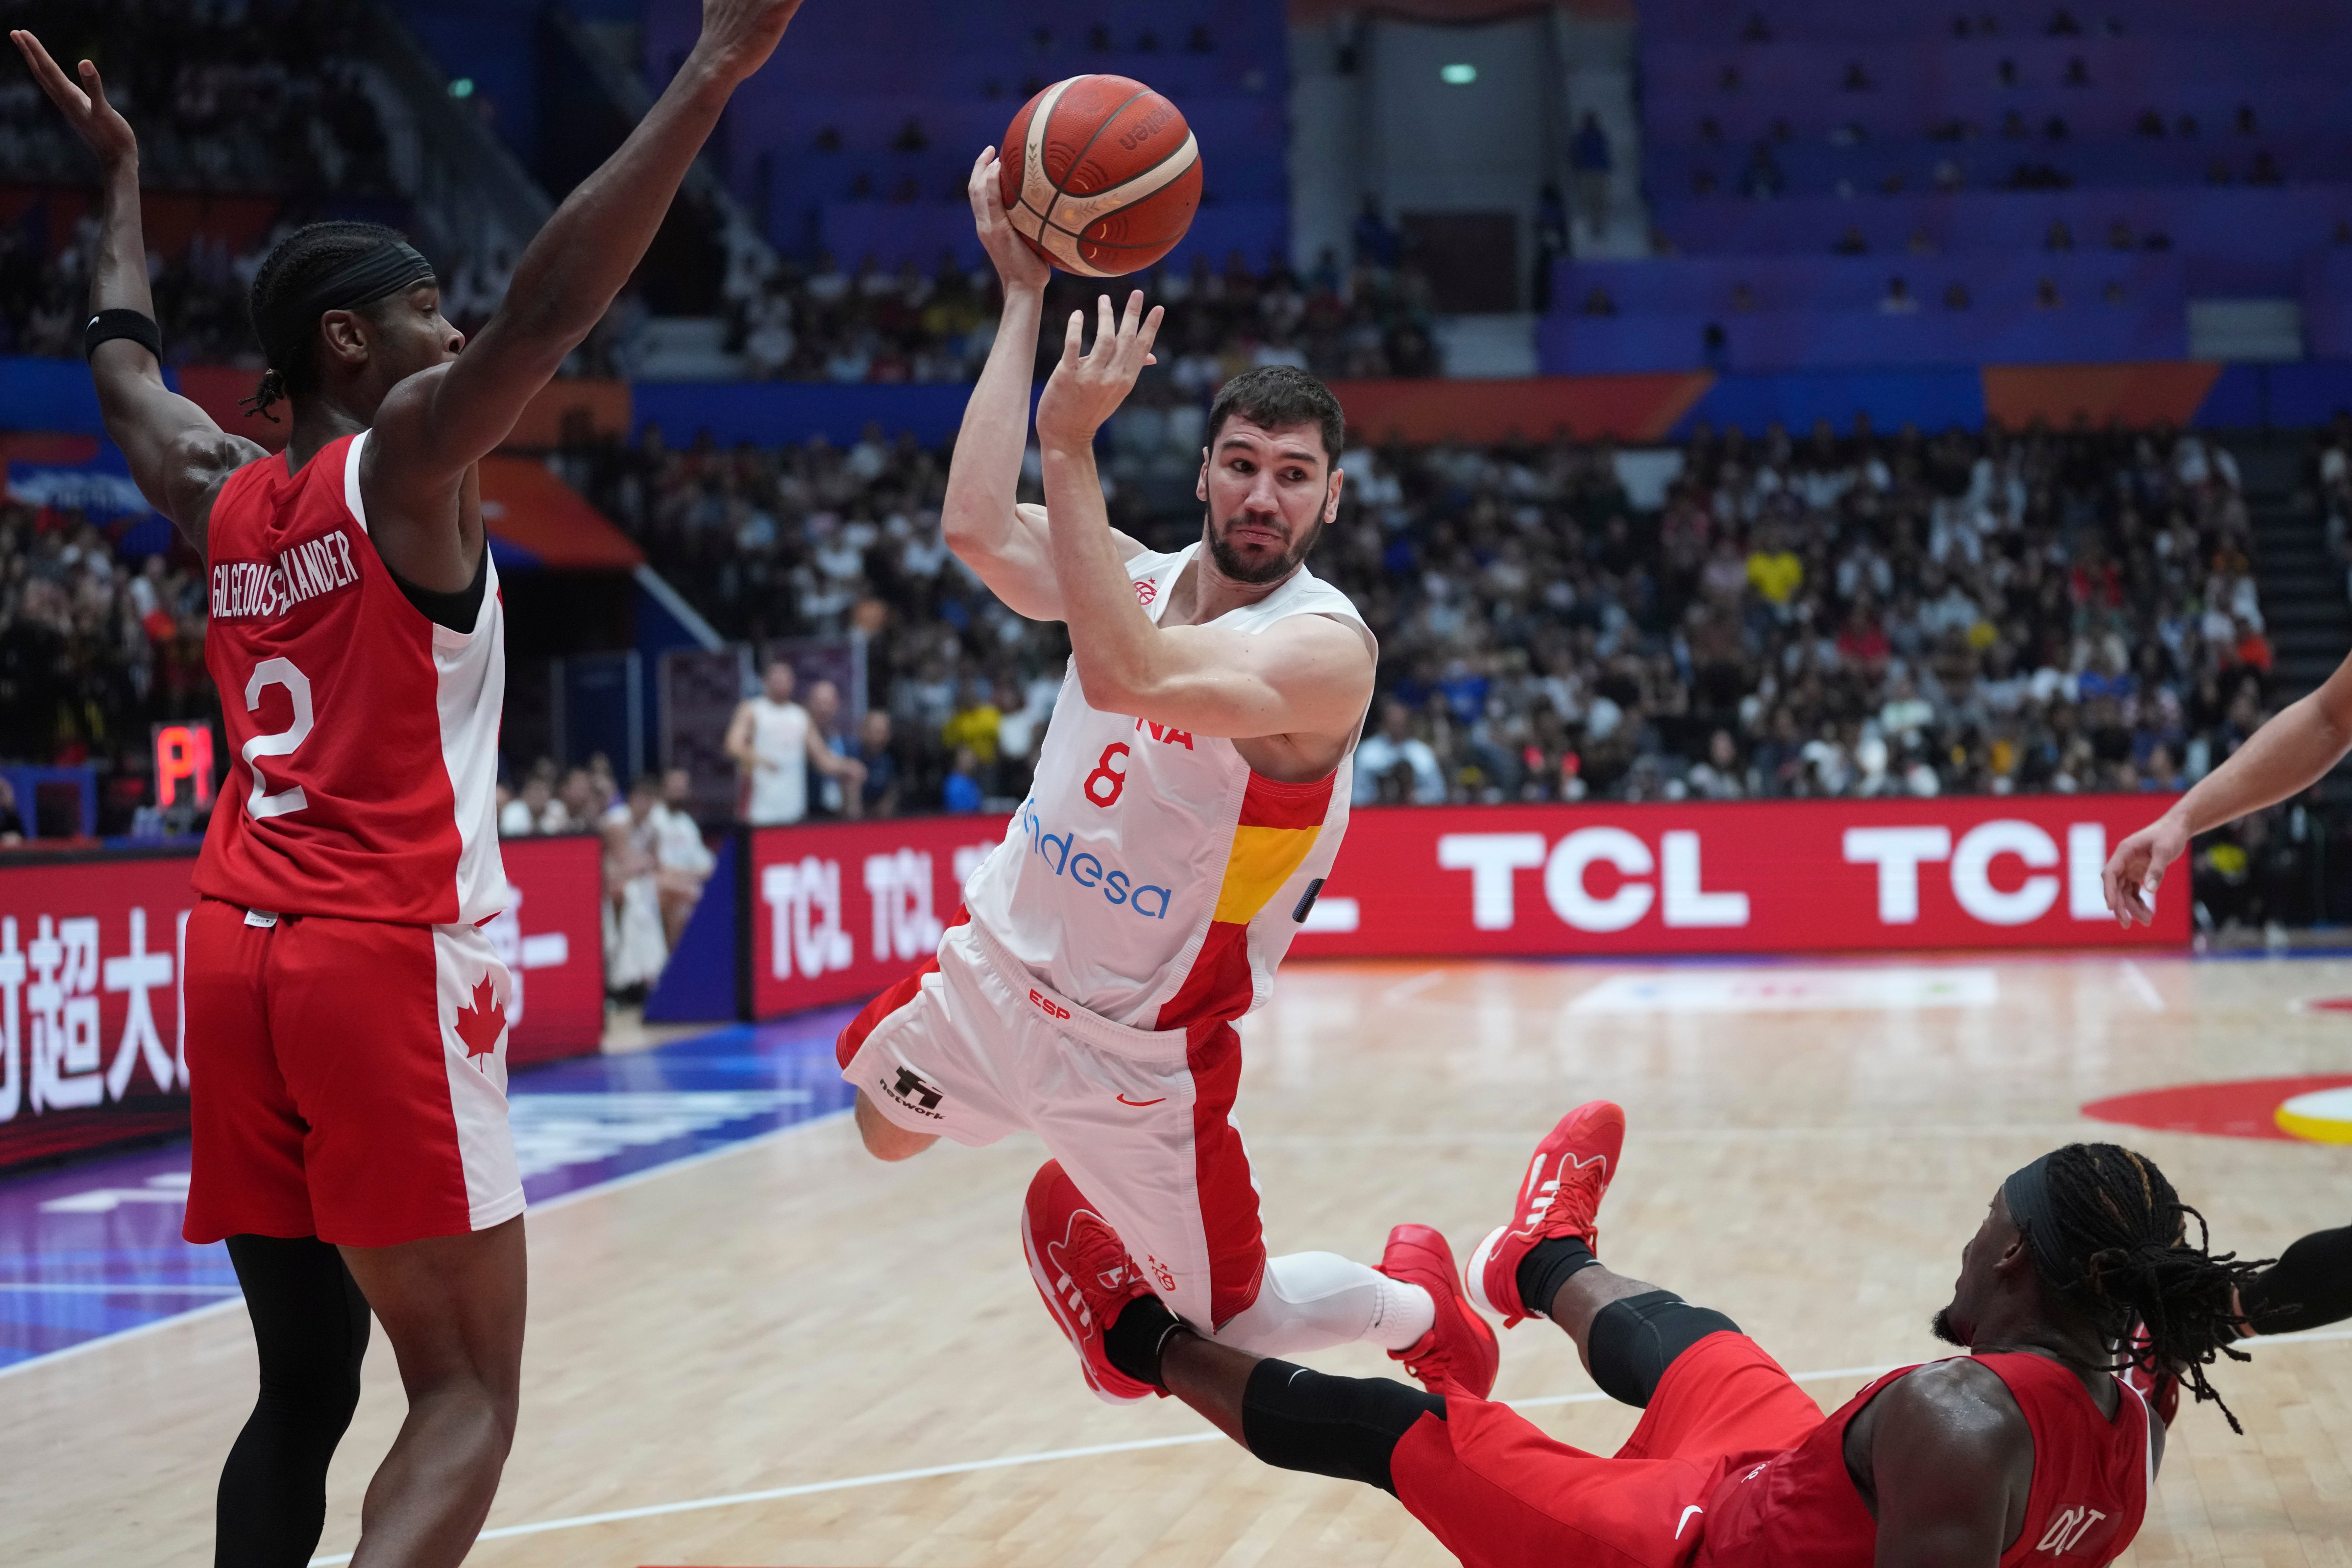 Spain guard Dario Brizuela (8) leaps as he drives against Canada guards Shai Gilgeous-Alexander (2) and Luguentz Dort (0) during the Basketball World Cup second round match between Spain and Canada at the Indonesia Arena stadium in Jakarta, Indonesia, on Sept. 3, 2023.  (Tatan Syuflana—AP)